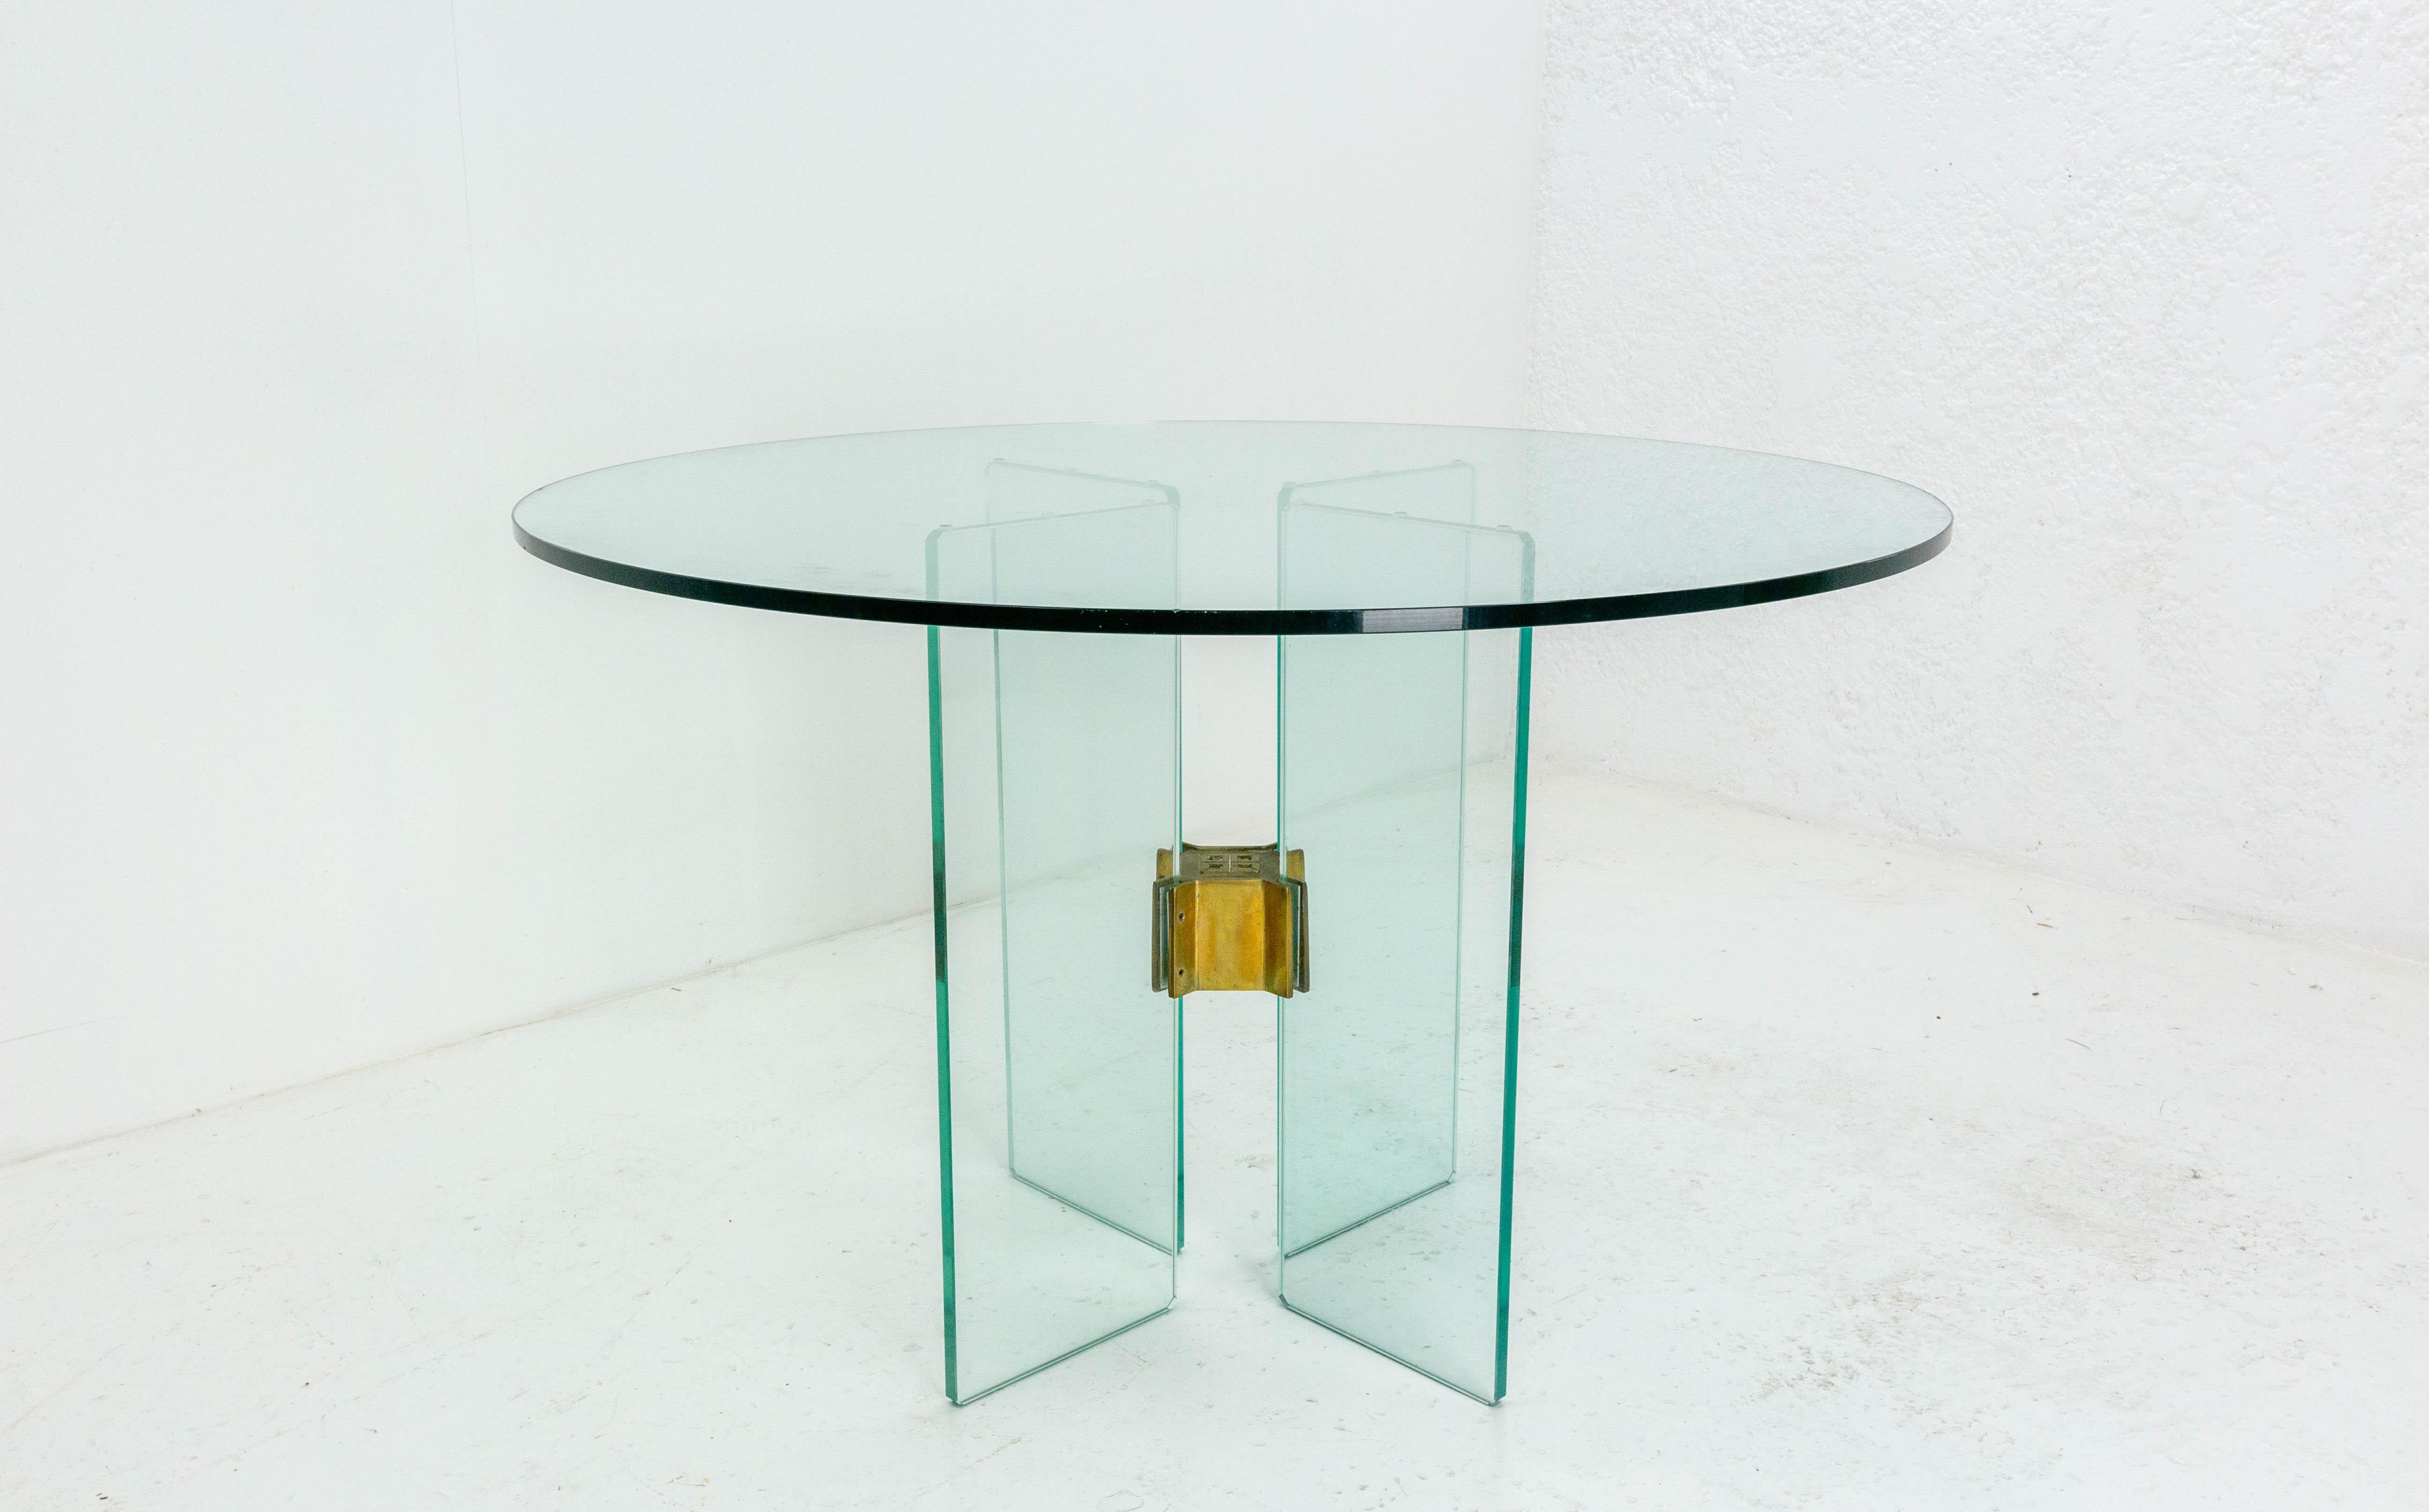 Italian glass and brass round dining table midcentury
Good condition

Shipping:
wooden case 120 / 17 /120 cm/ 95 kg.
  